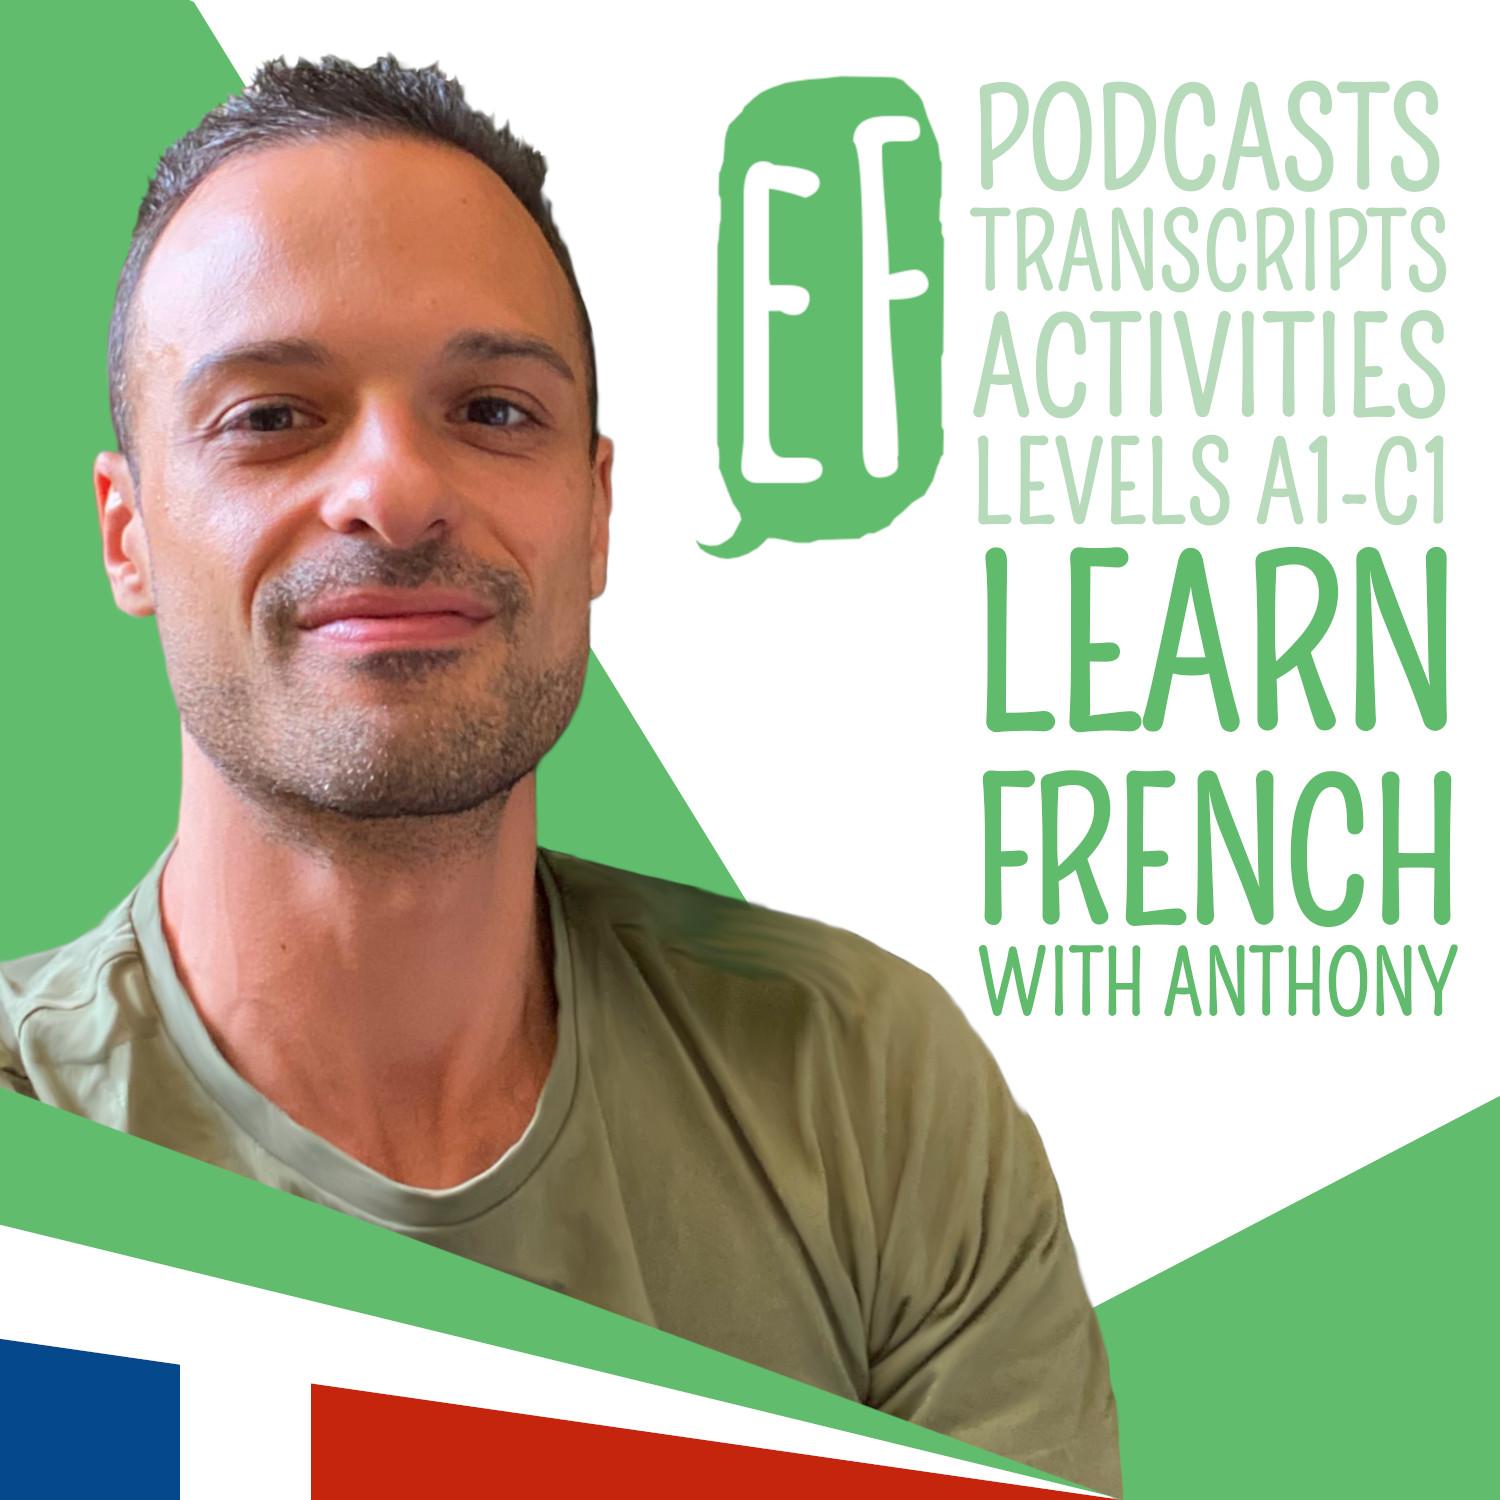 Explore French Podcast - Learn French with Anthony